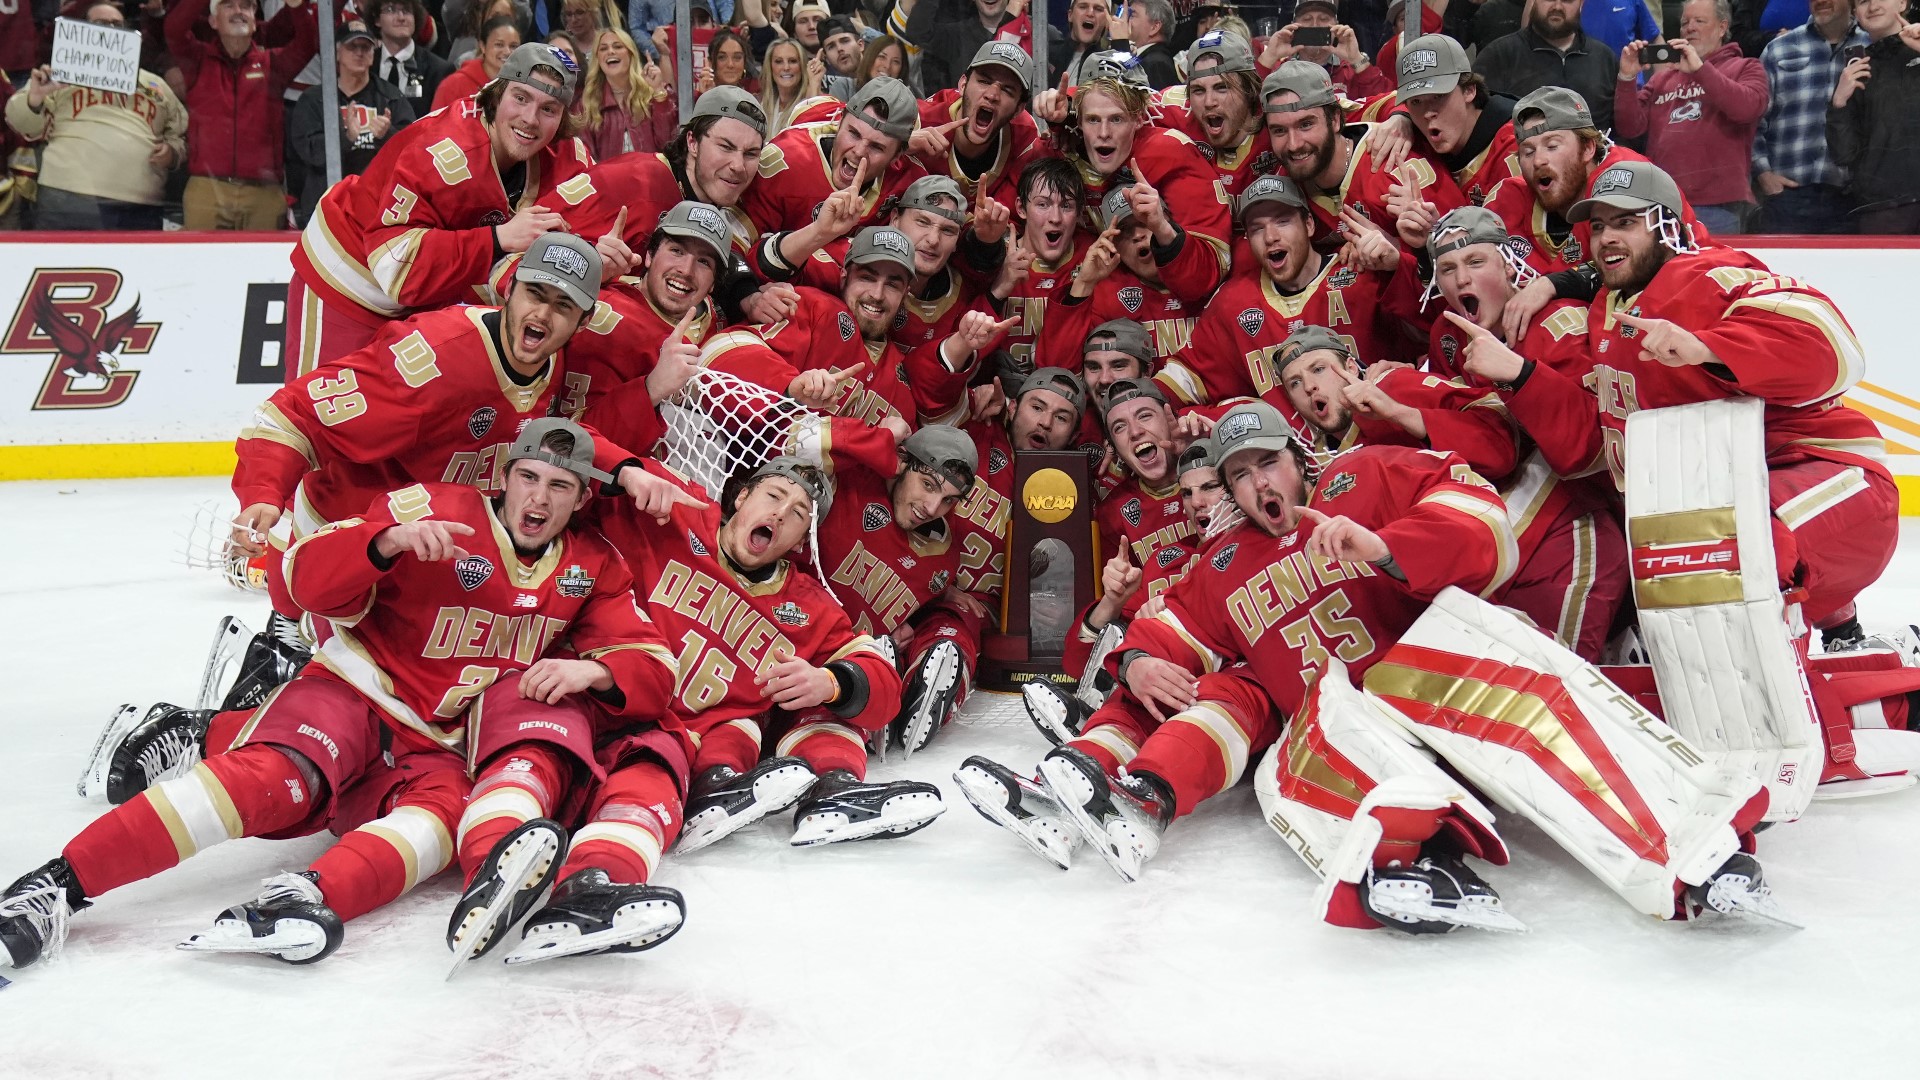 The Pioneers captured an NCAA-record 10th national title by shutting out Boston College 2-0 in the championship game on Saturday.